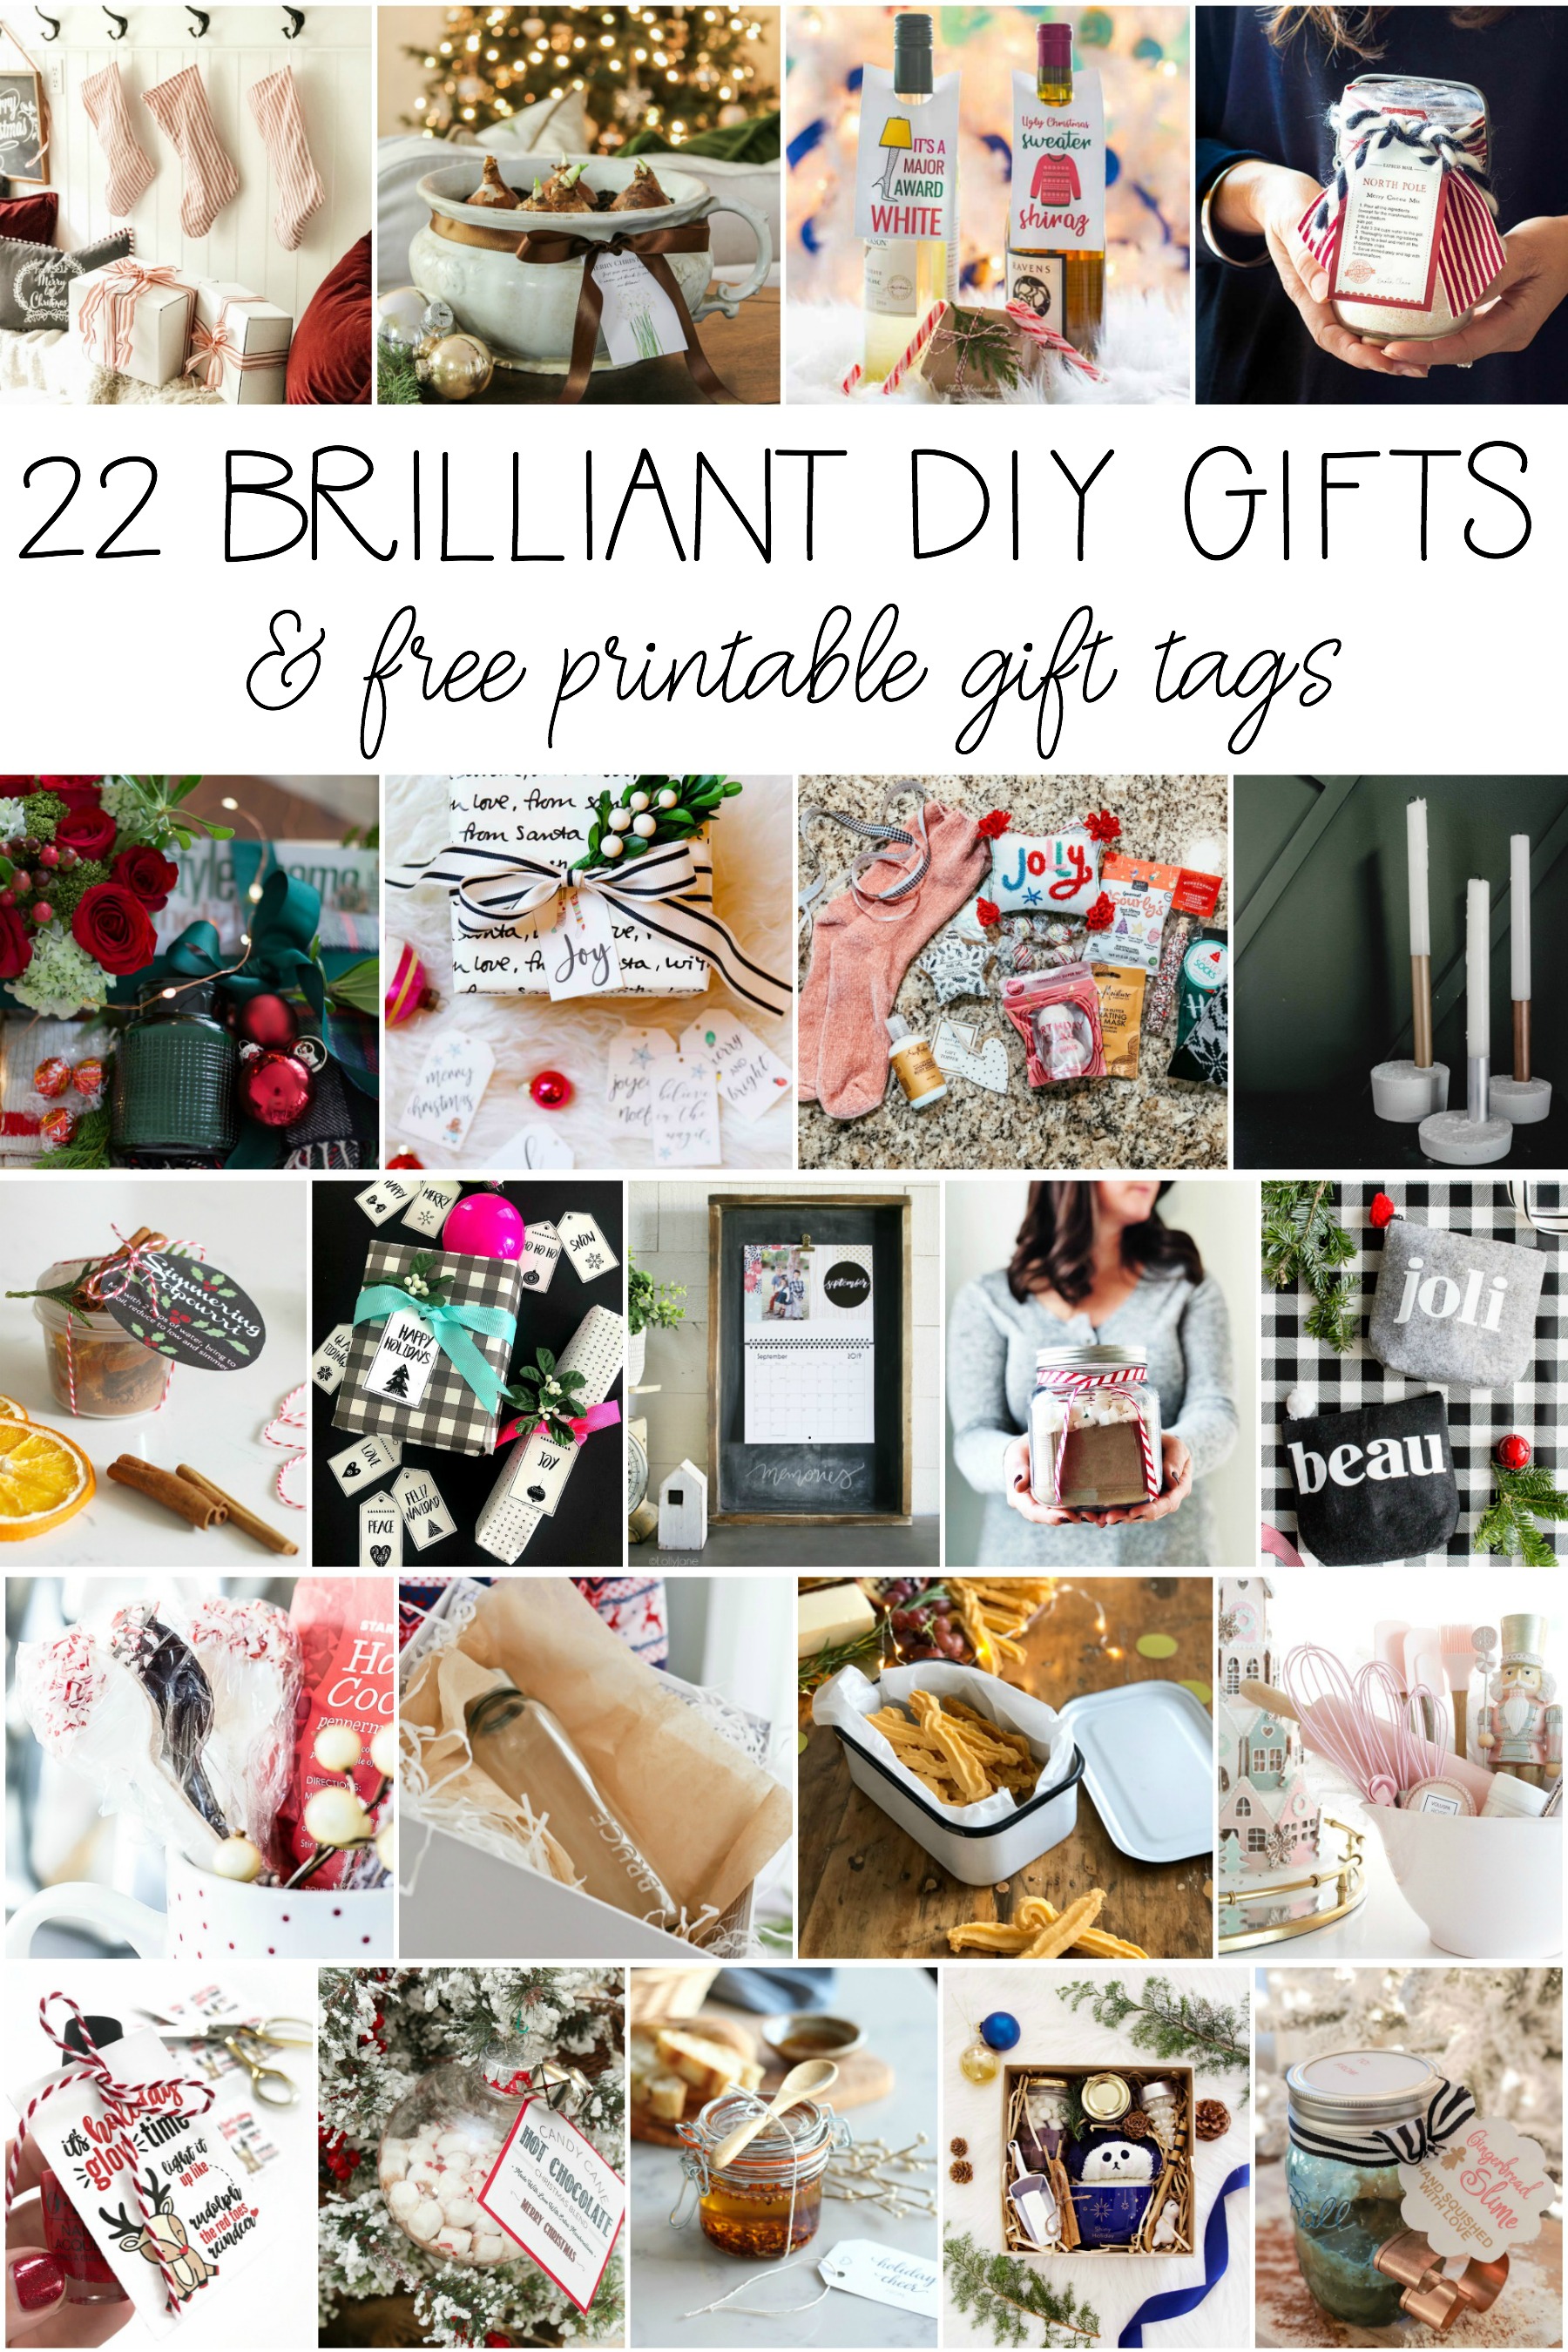 22 brilliant DIY Gift ideas for the holidays many with free printable gift tags